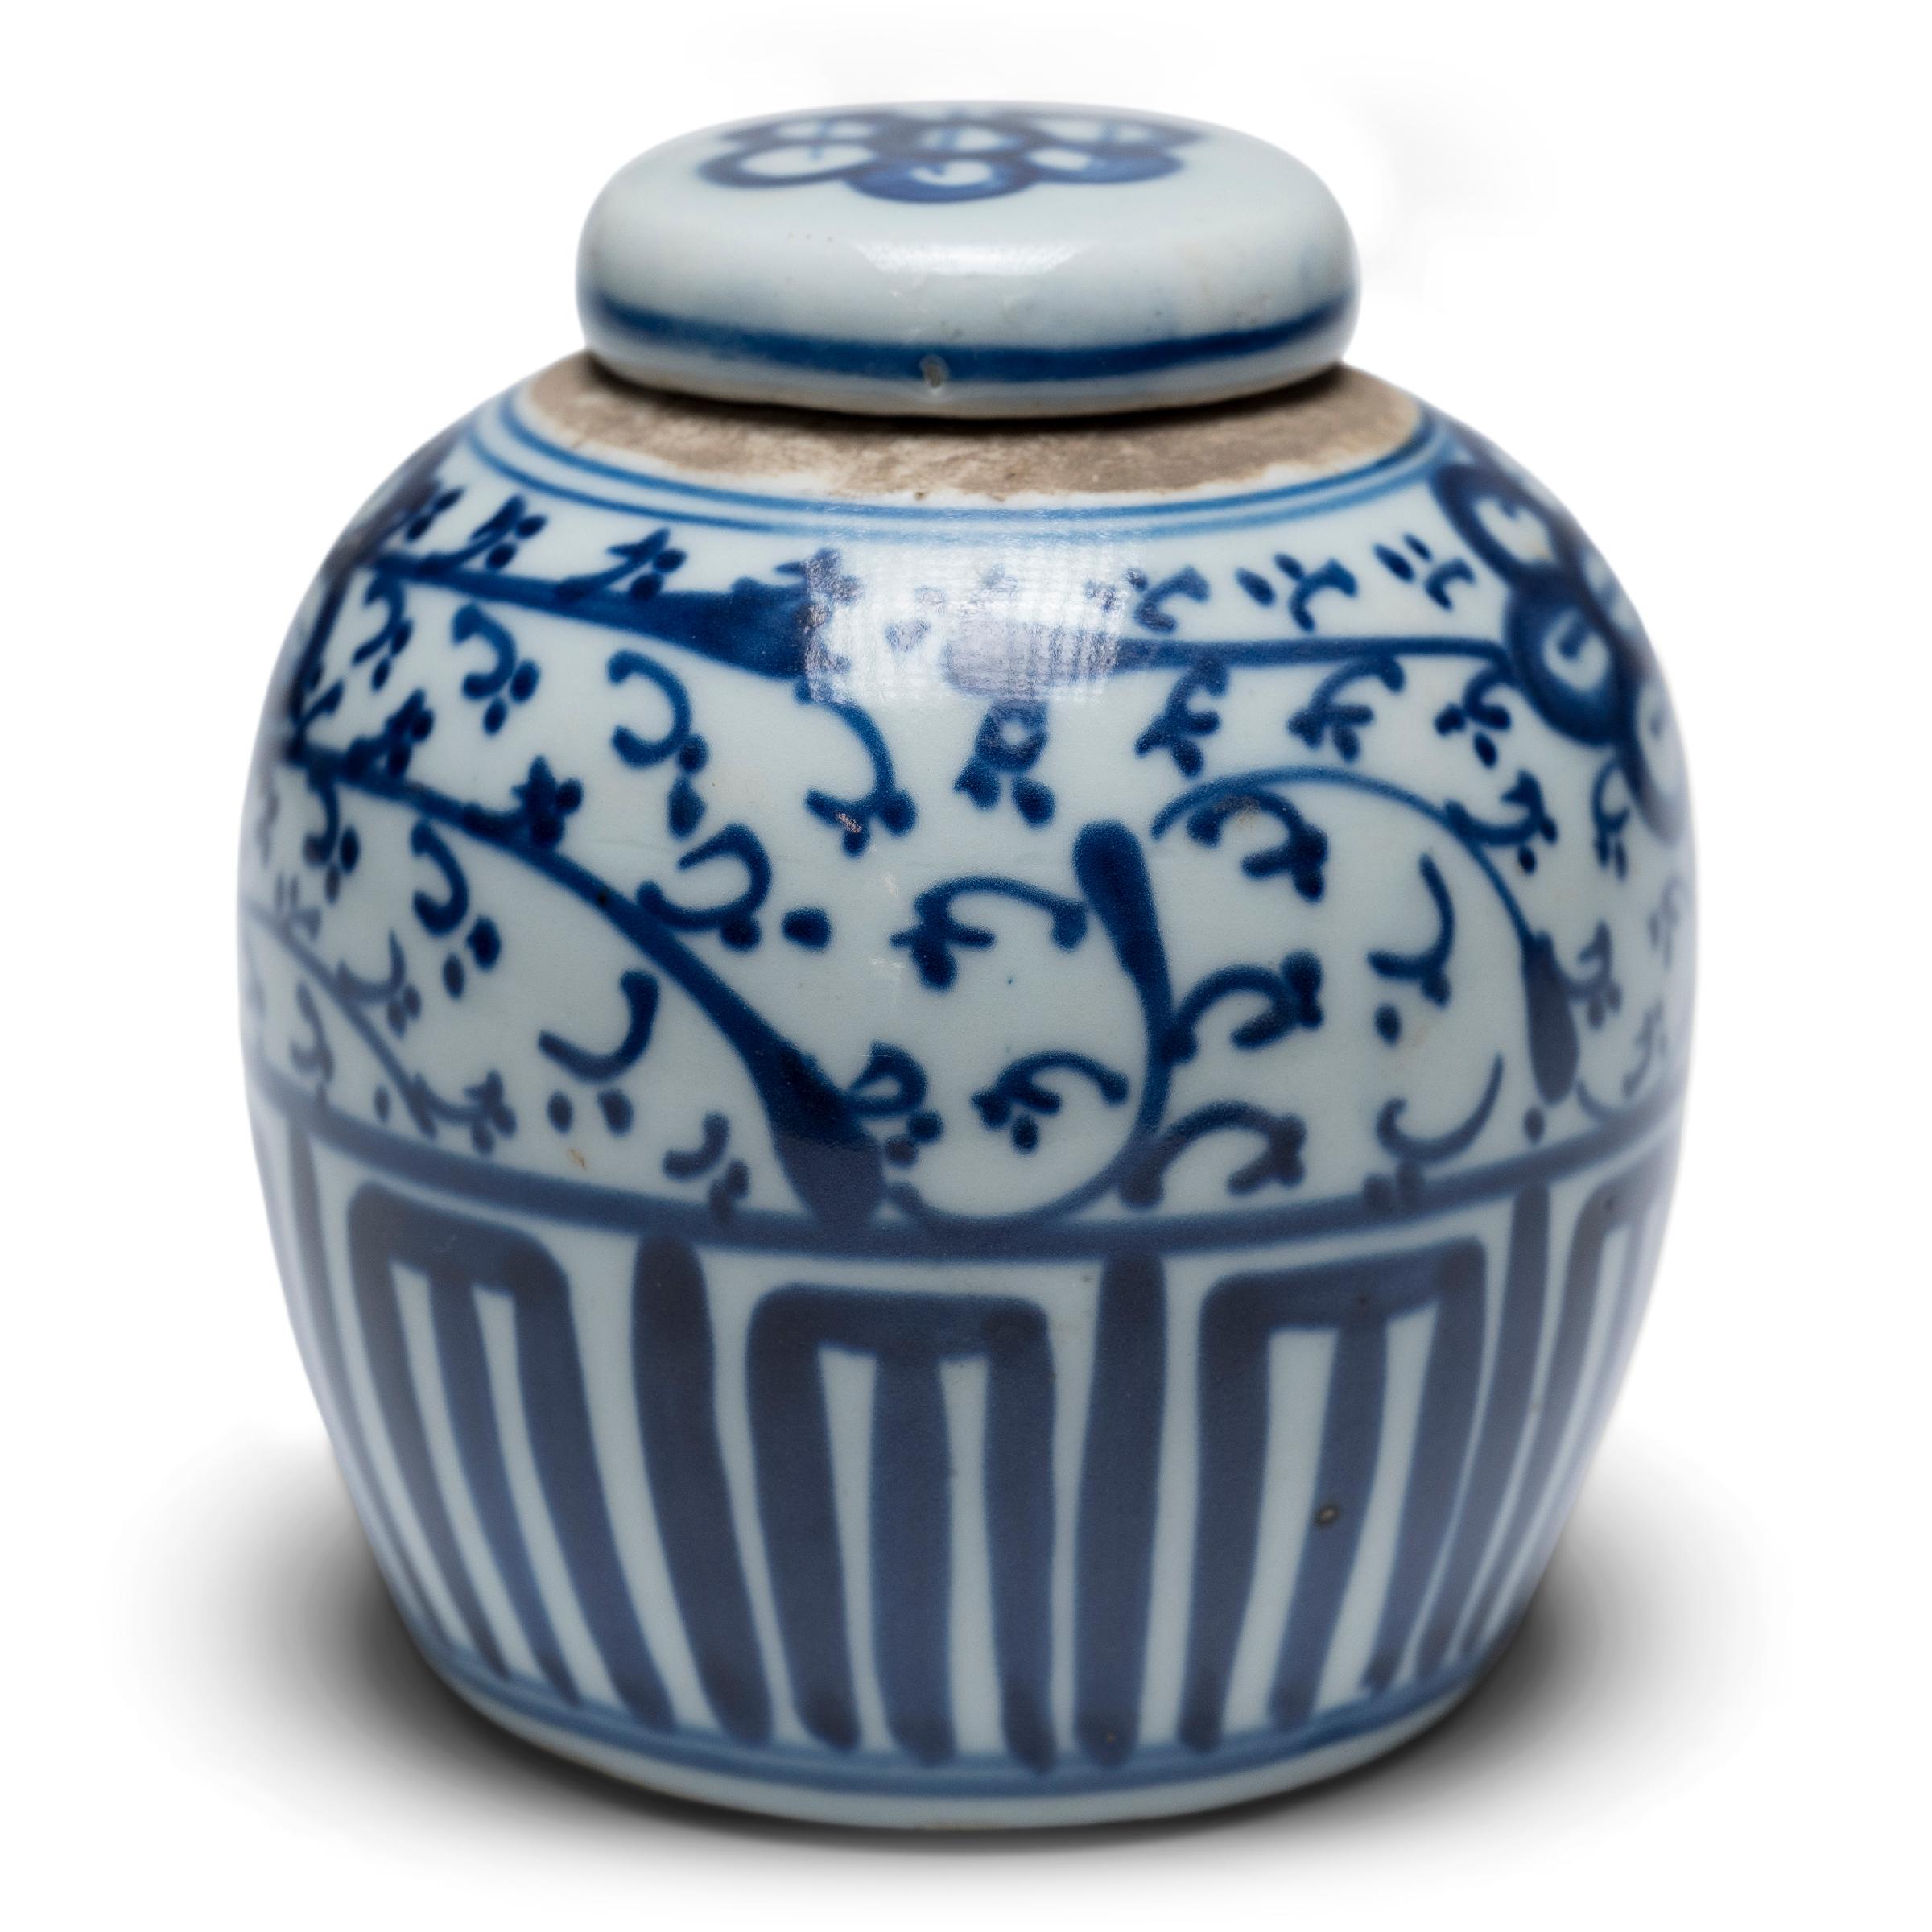 Glazed in the classic blue-and-white manner, this petite Chinese ginger jar is the perfect accent to a bookcase or console table. The little jar is hand-painted in dark, cobalt-blue pigments with an all-over pattern of flowers and trailing vines